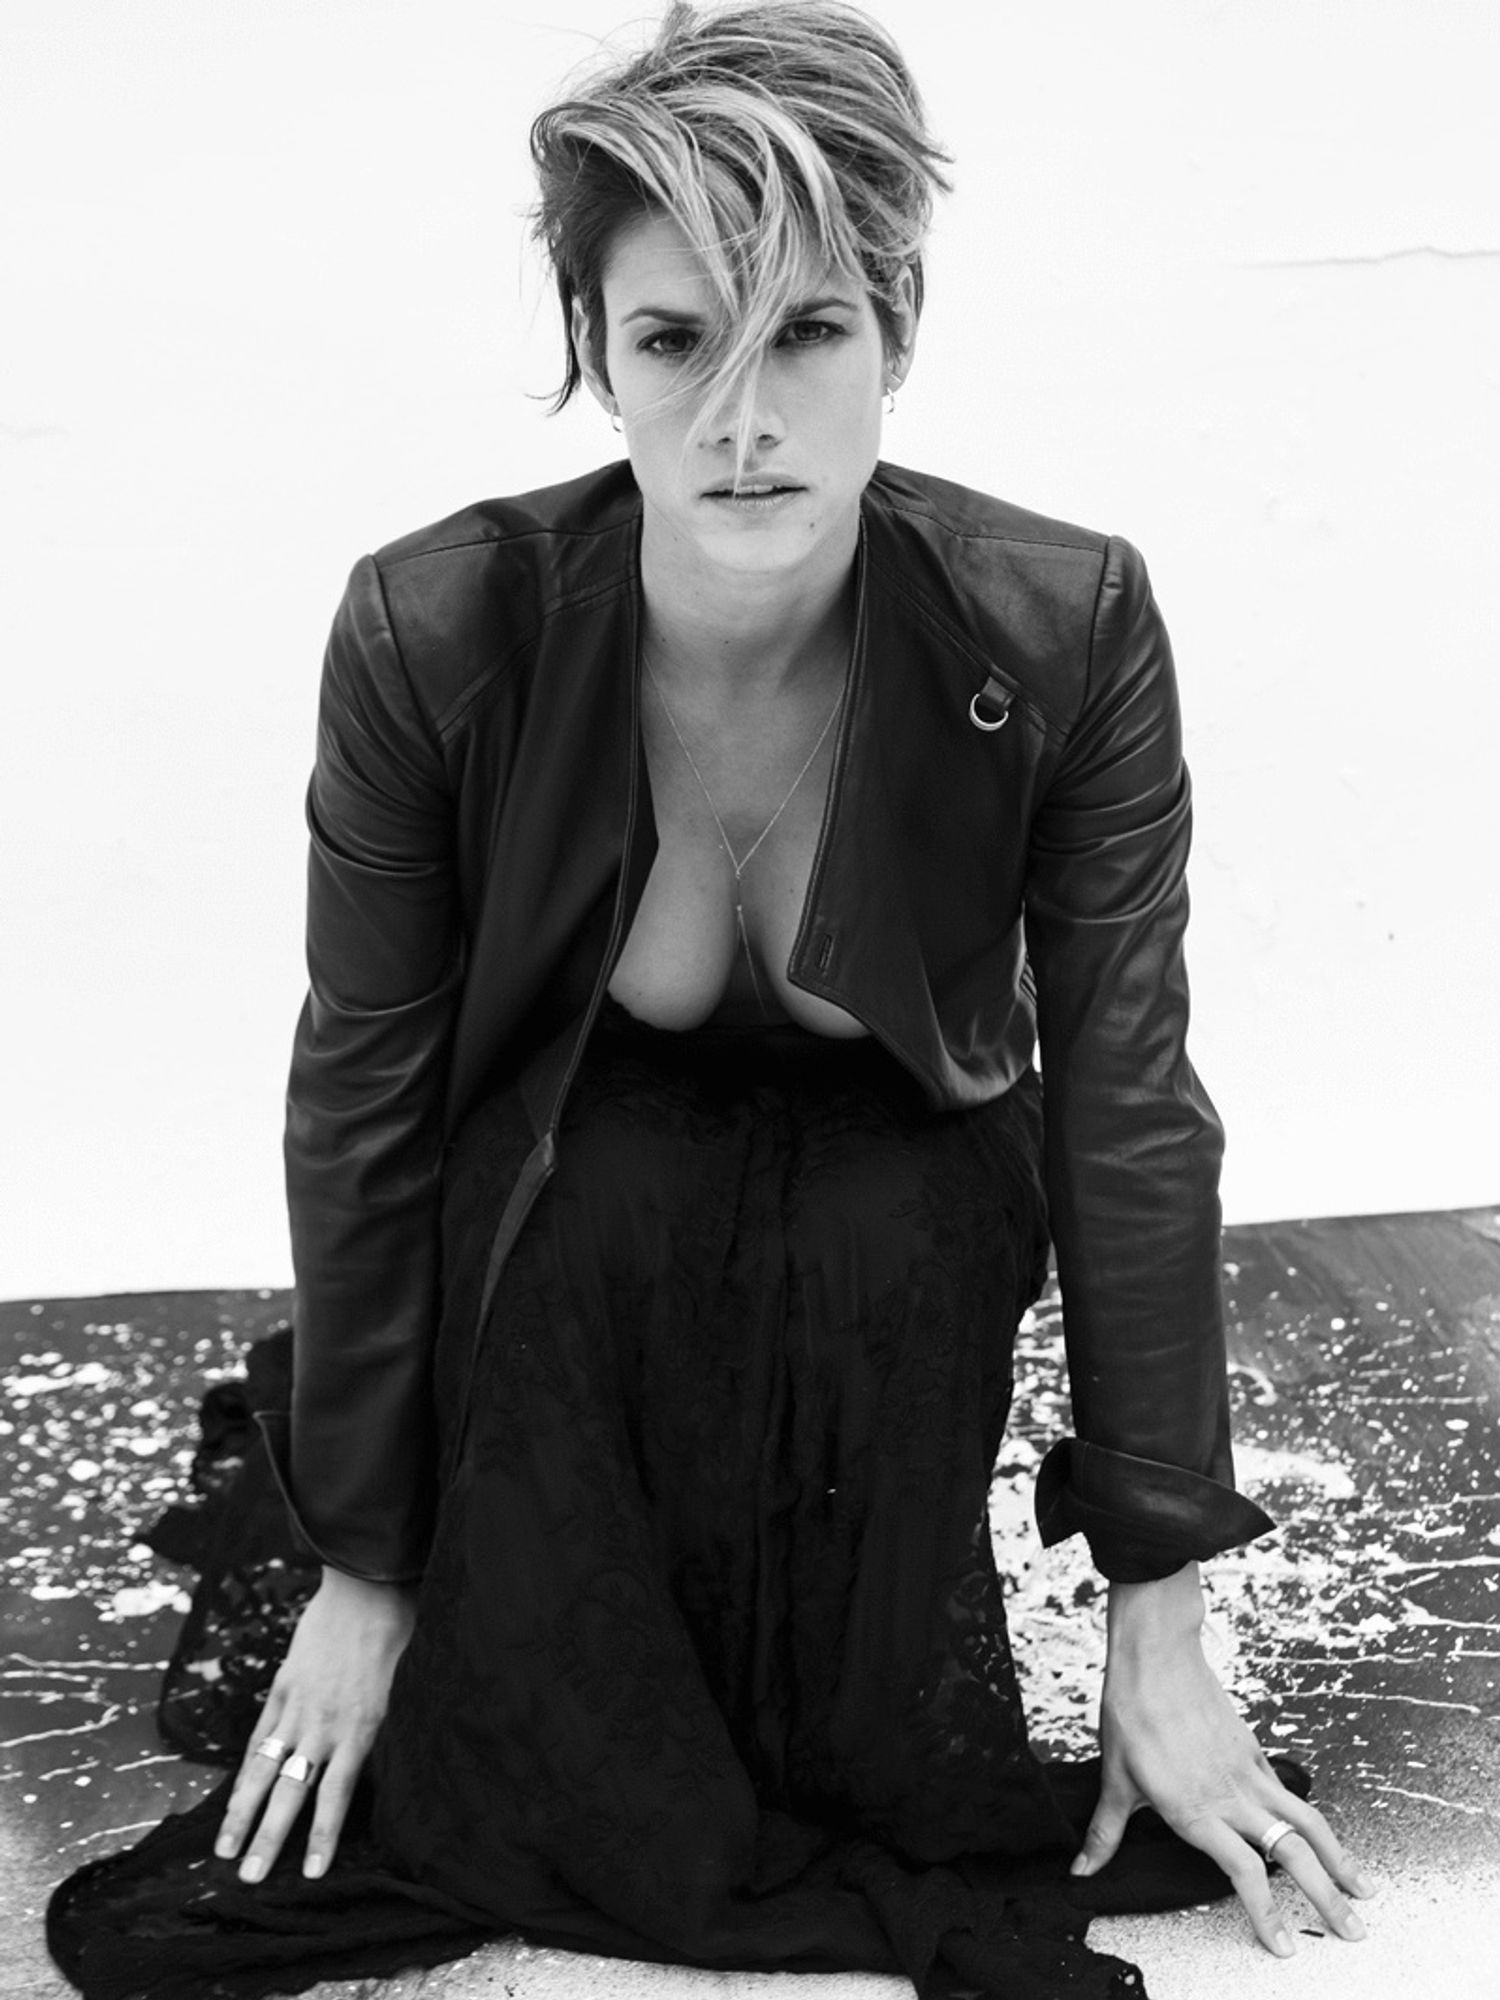 Missy Peregrym in a leather jacket on a paint splattered surface